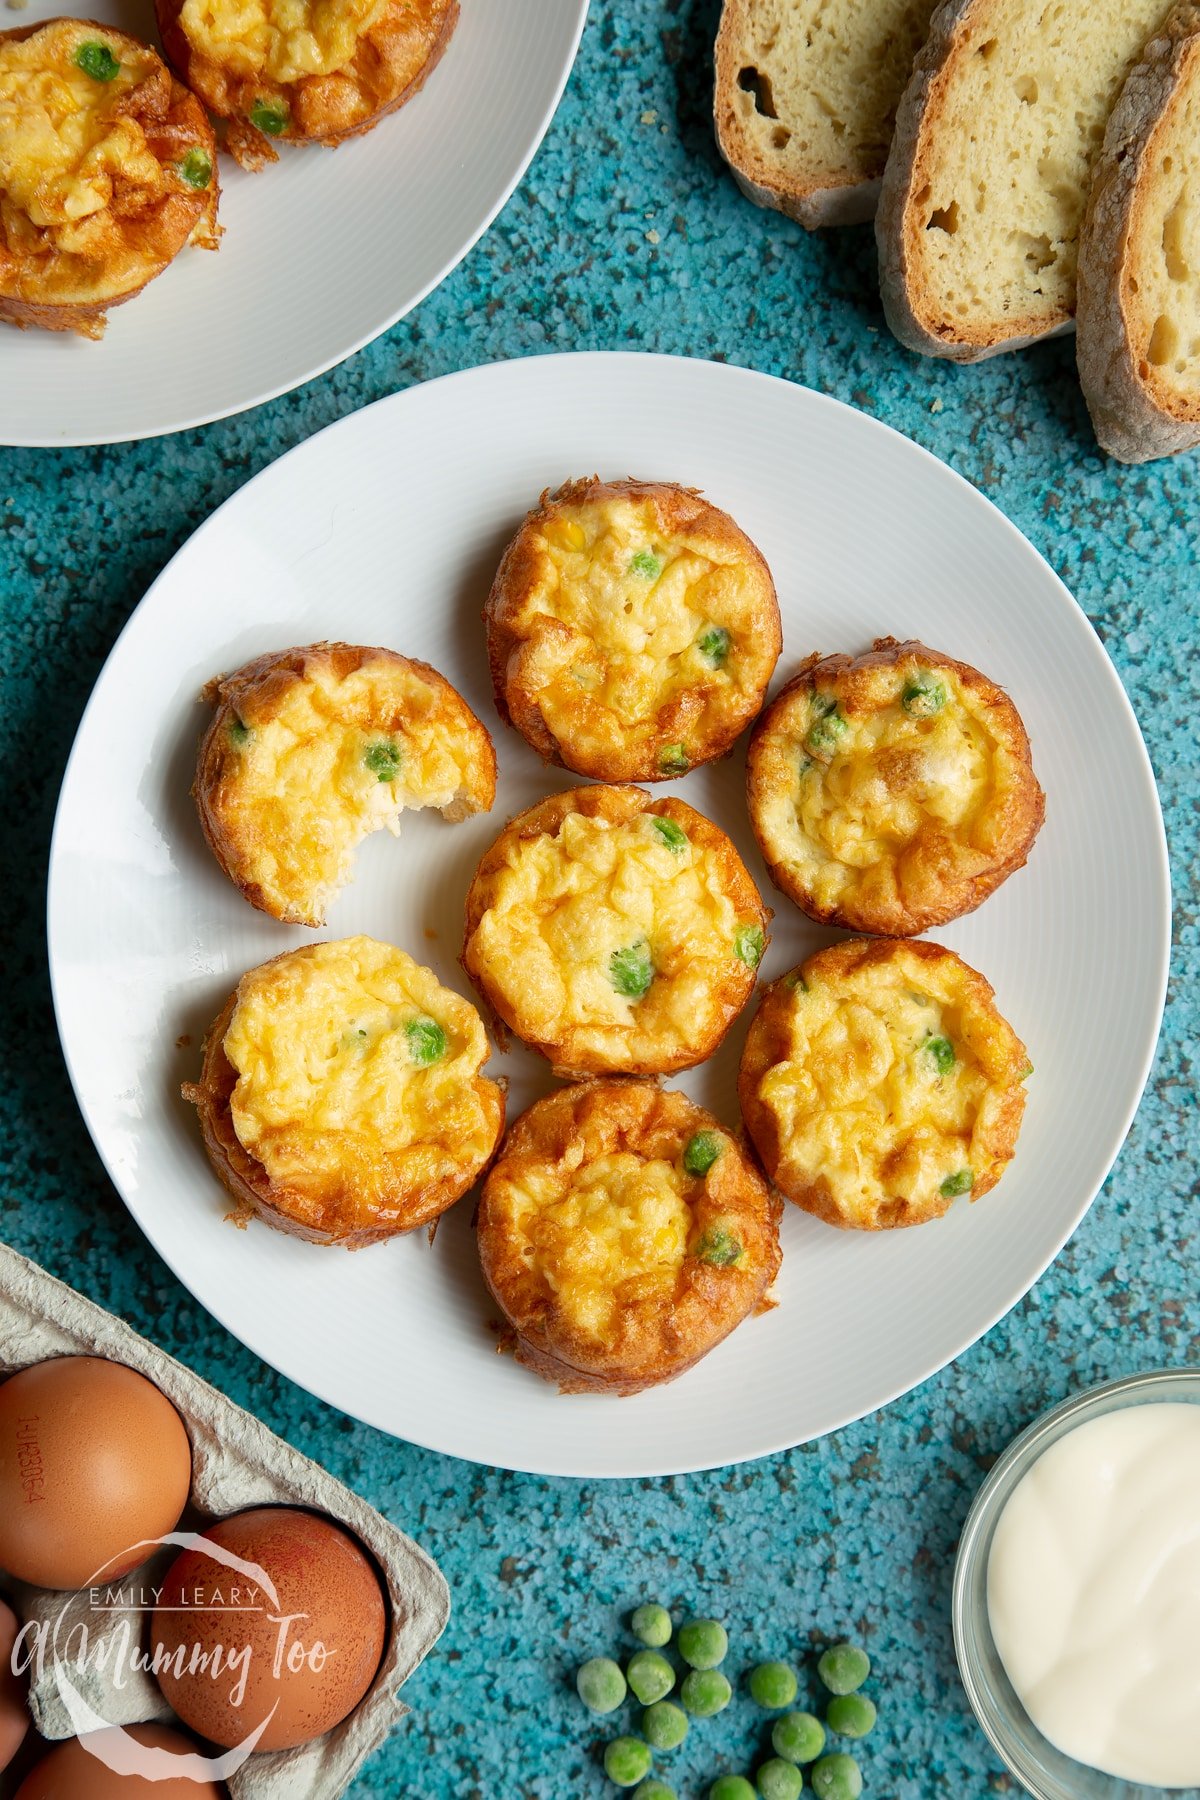 Mini vegetable frittatas arranged on a white plate. A hand reaches in to take a frittata.